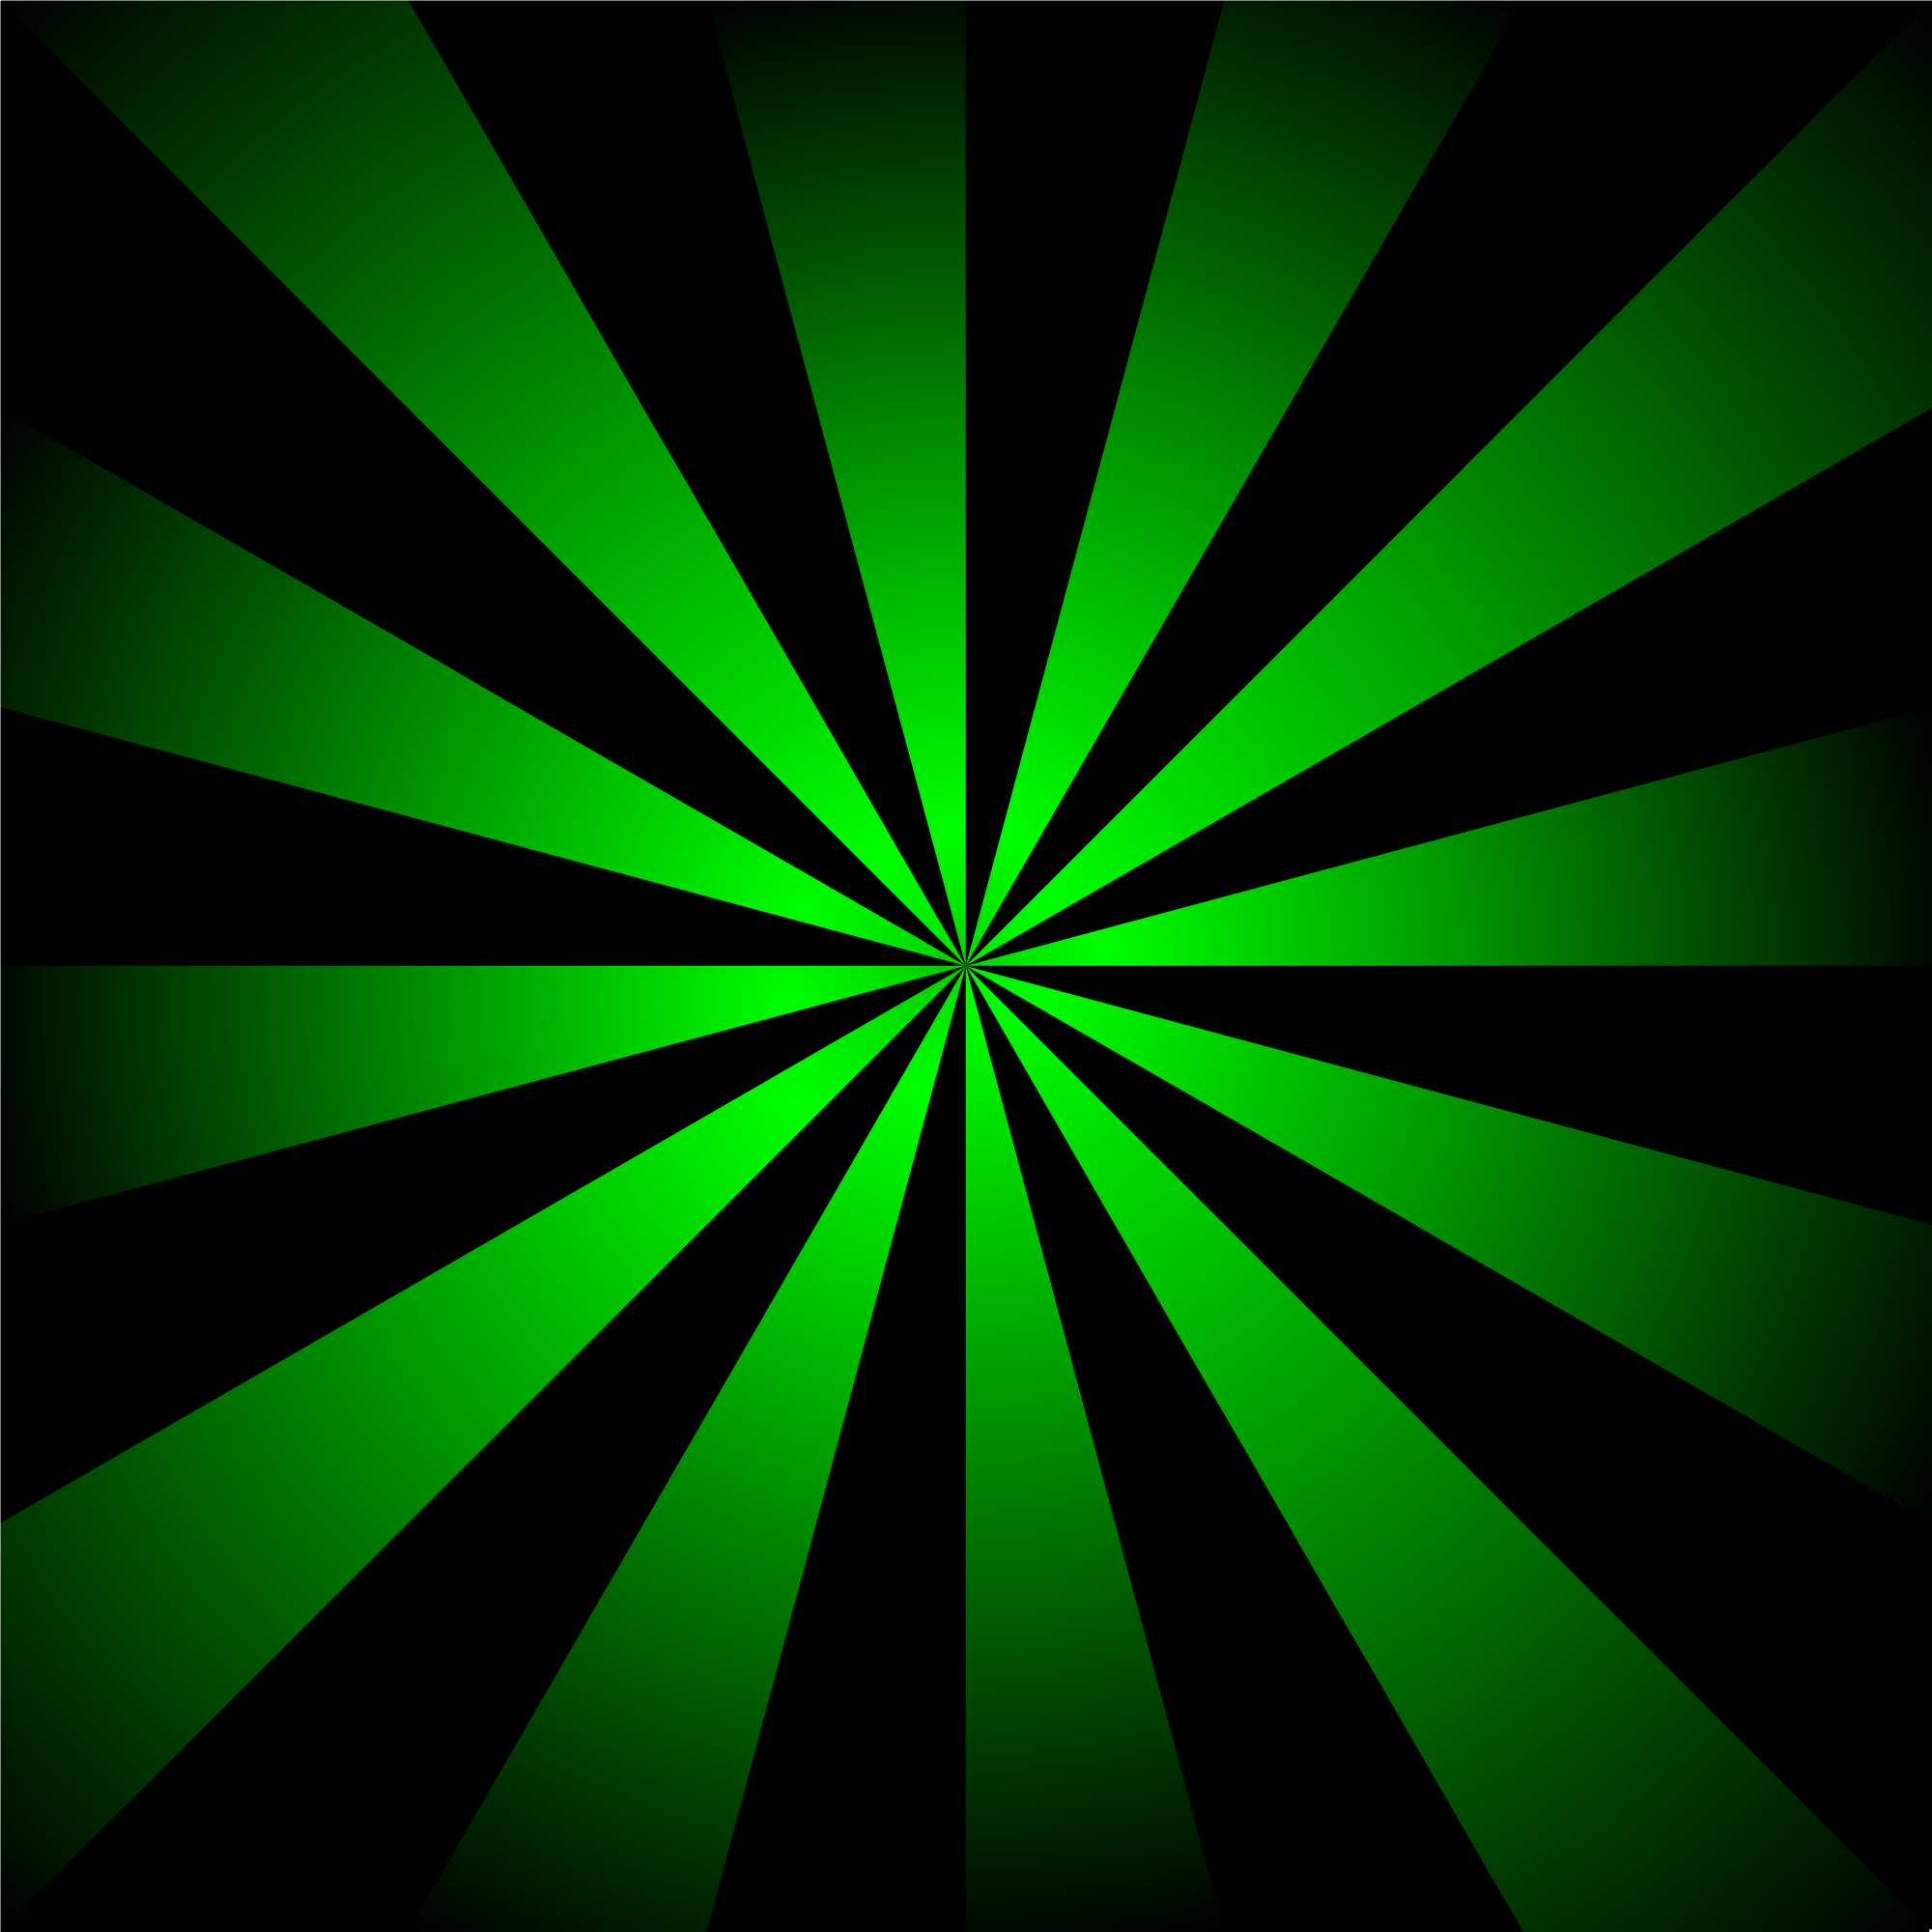 Black and Green (2000x2000)